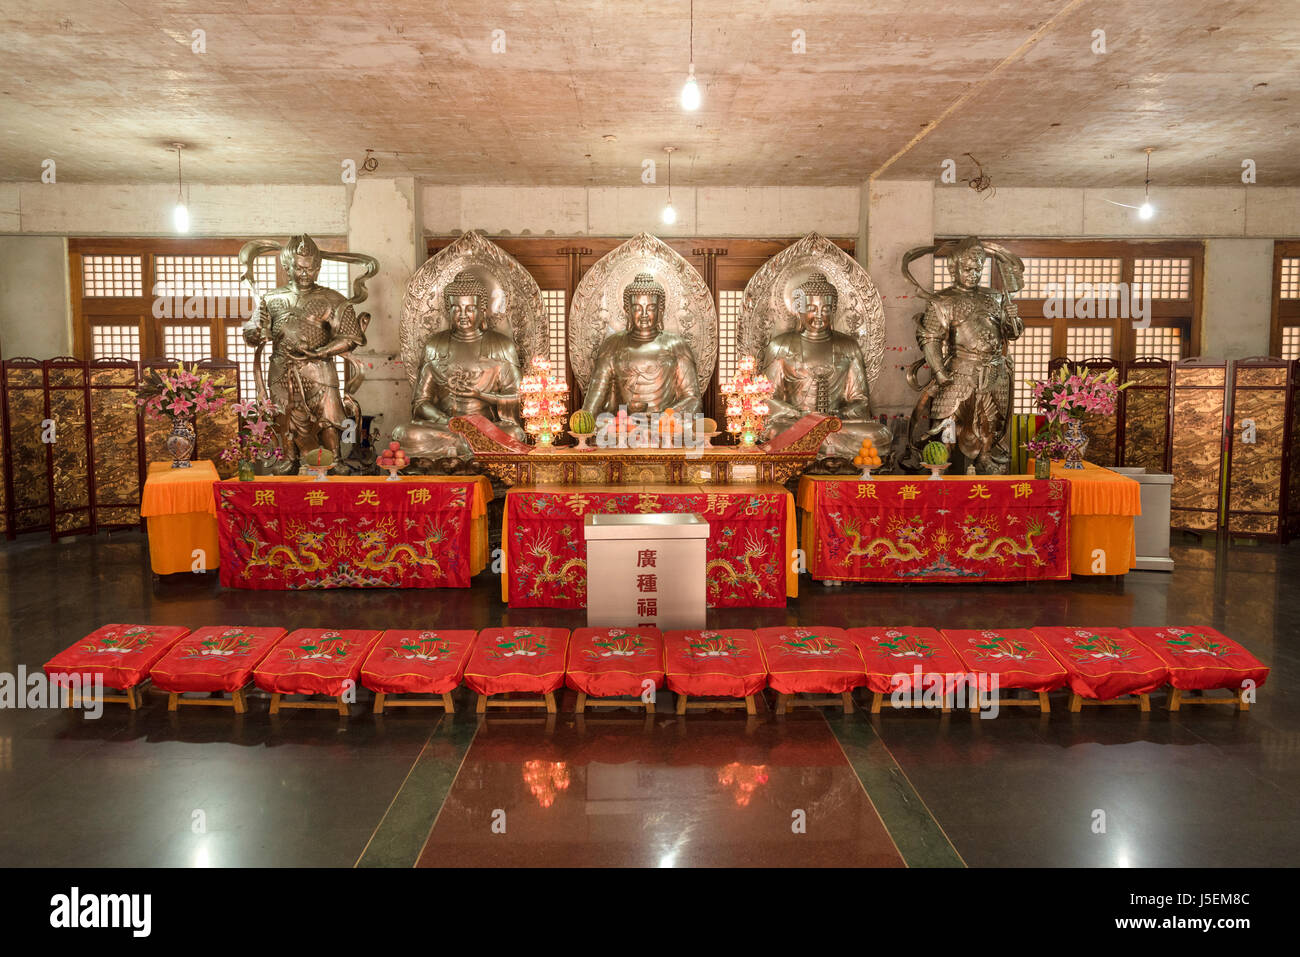 Shrine and buddha statue at Jing'An buddhist temple in Shanghai, China Stock Photo